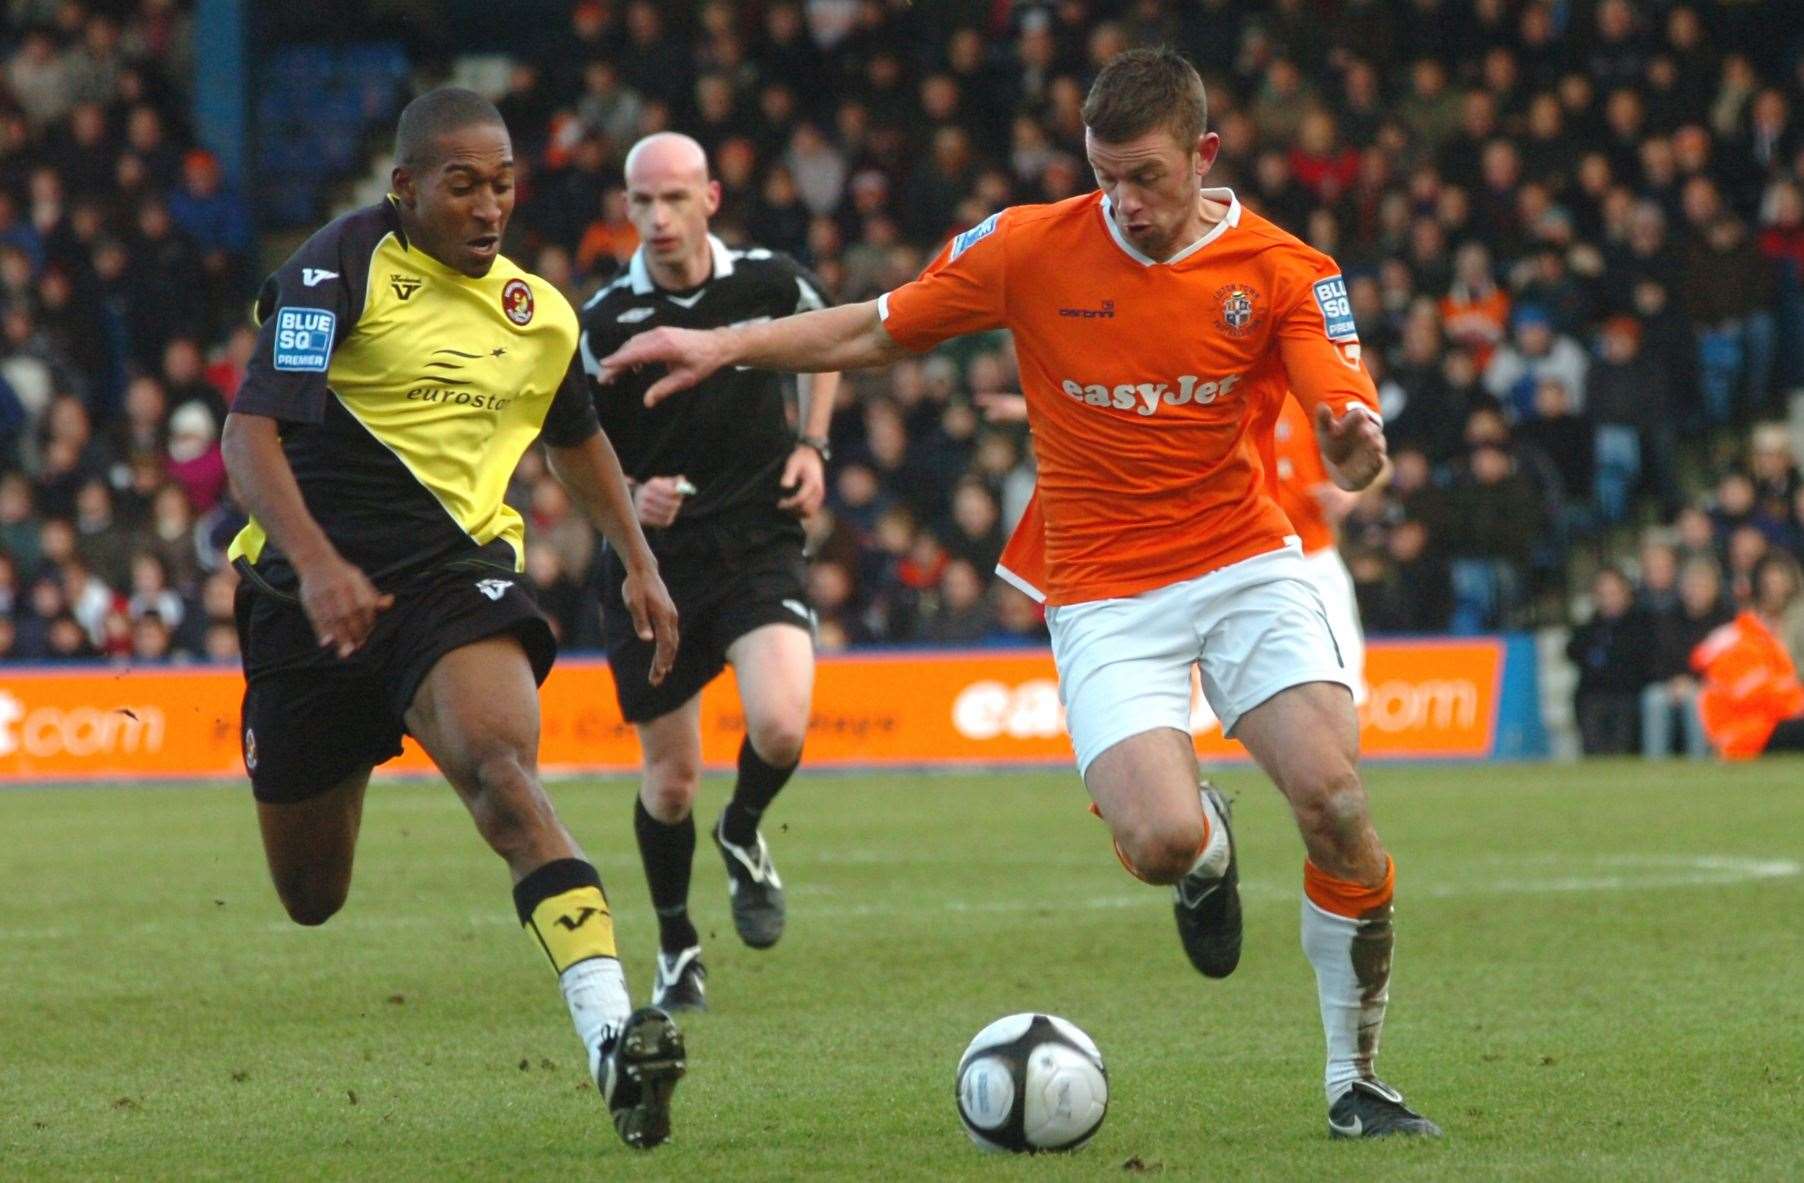 Ebbsfleet’s Ricky Shakes closes down Luton at Kenilworth Road during their 3-2 win in January 2010. Picture: Joanna Cross/The Luton News